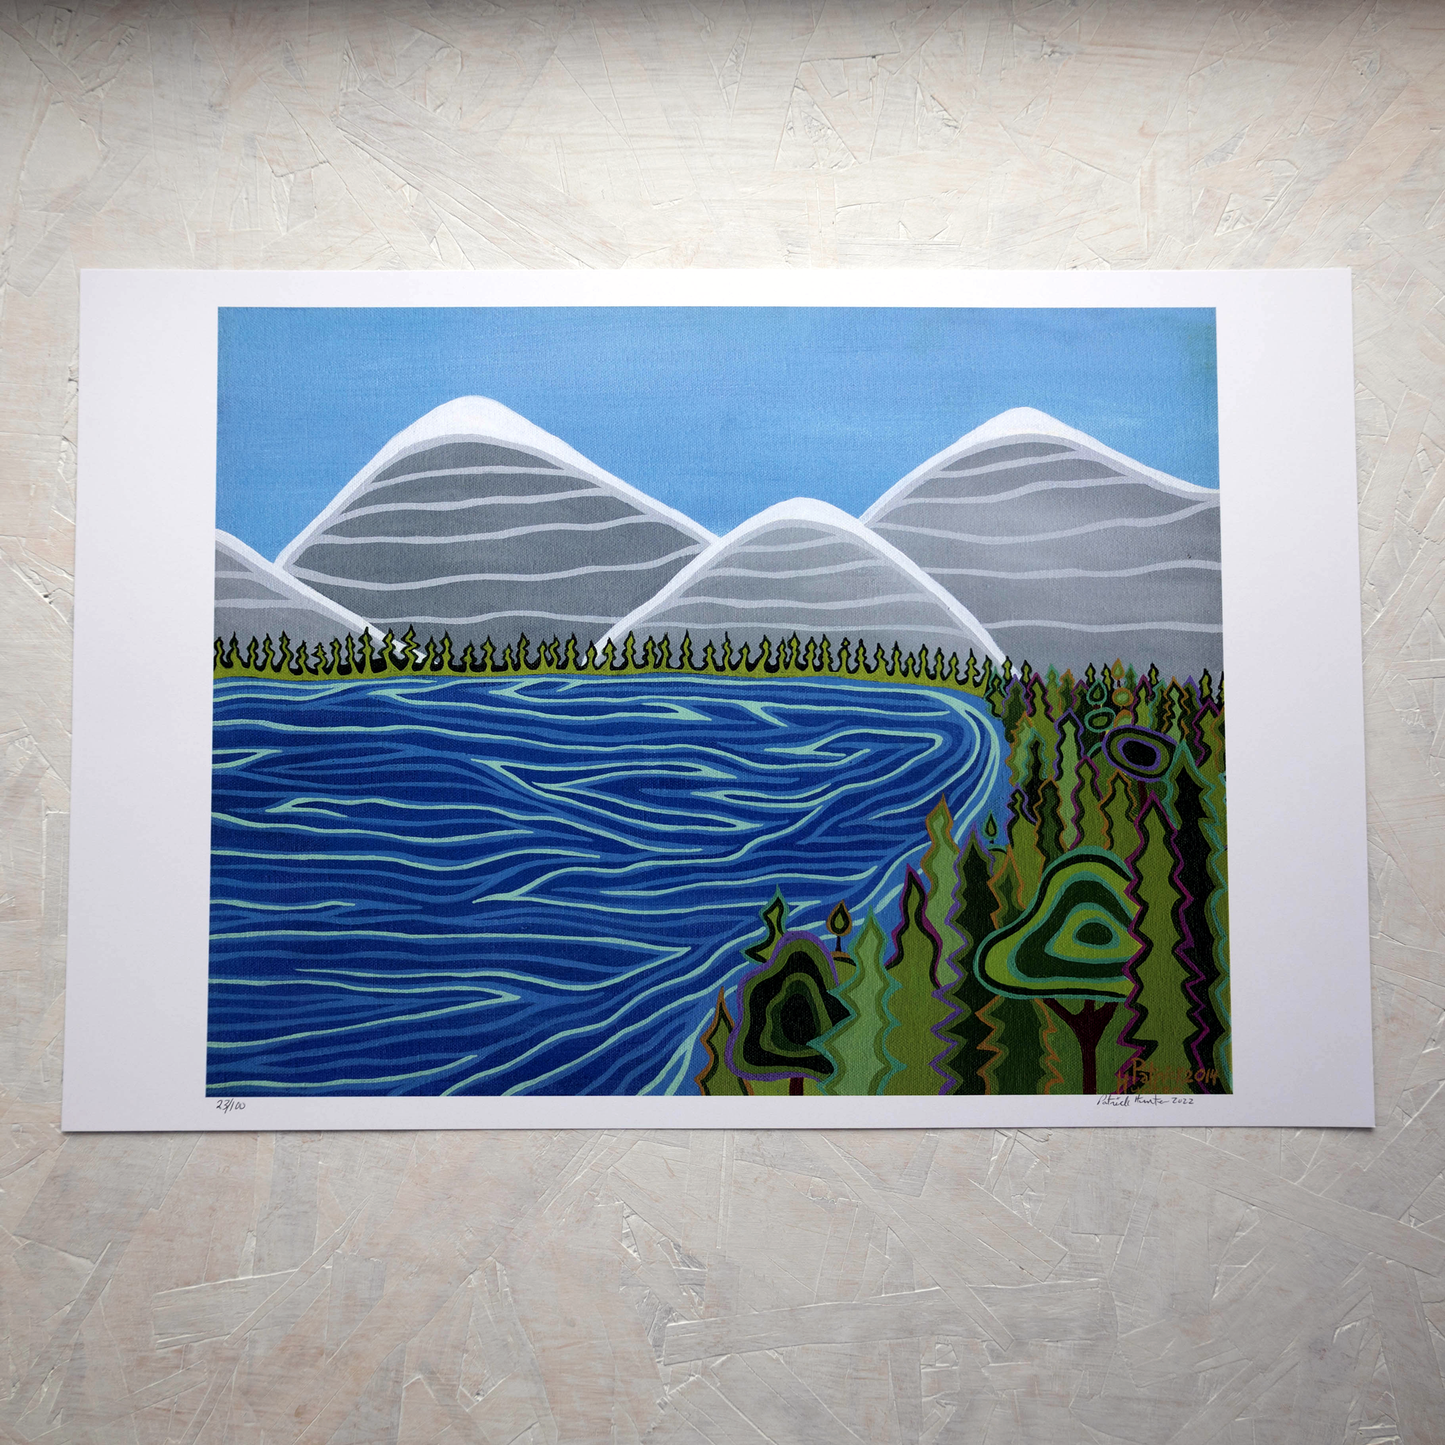 Print of Patrick Hunter's painting of a body of water with forest and mountains in the background, woodland art style.